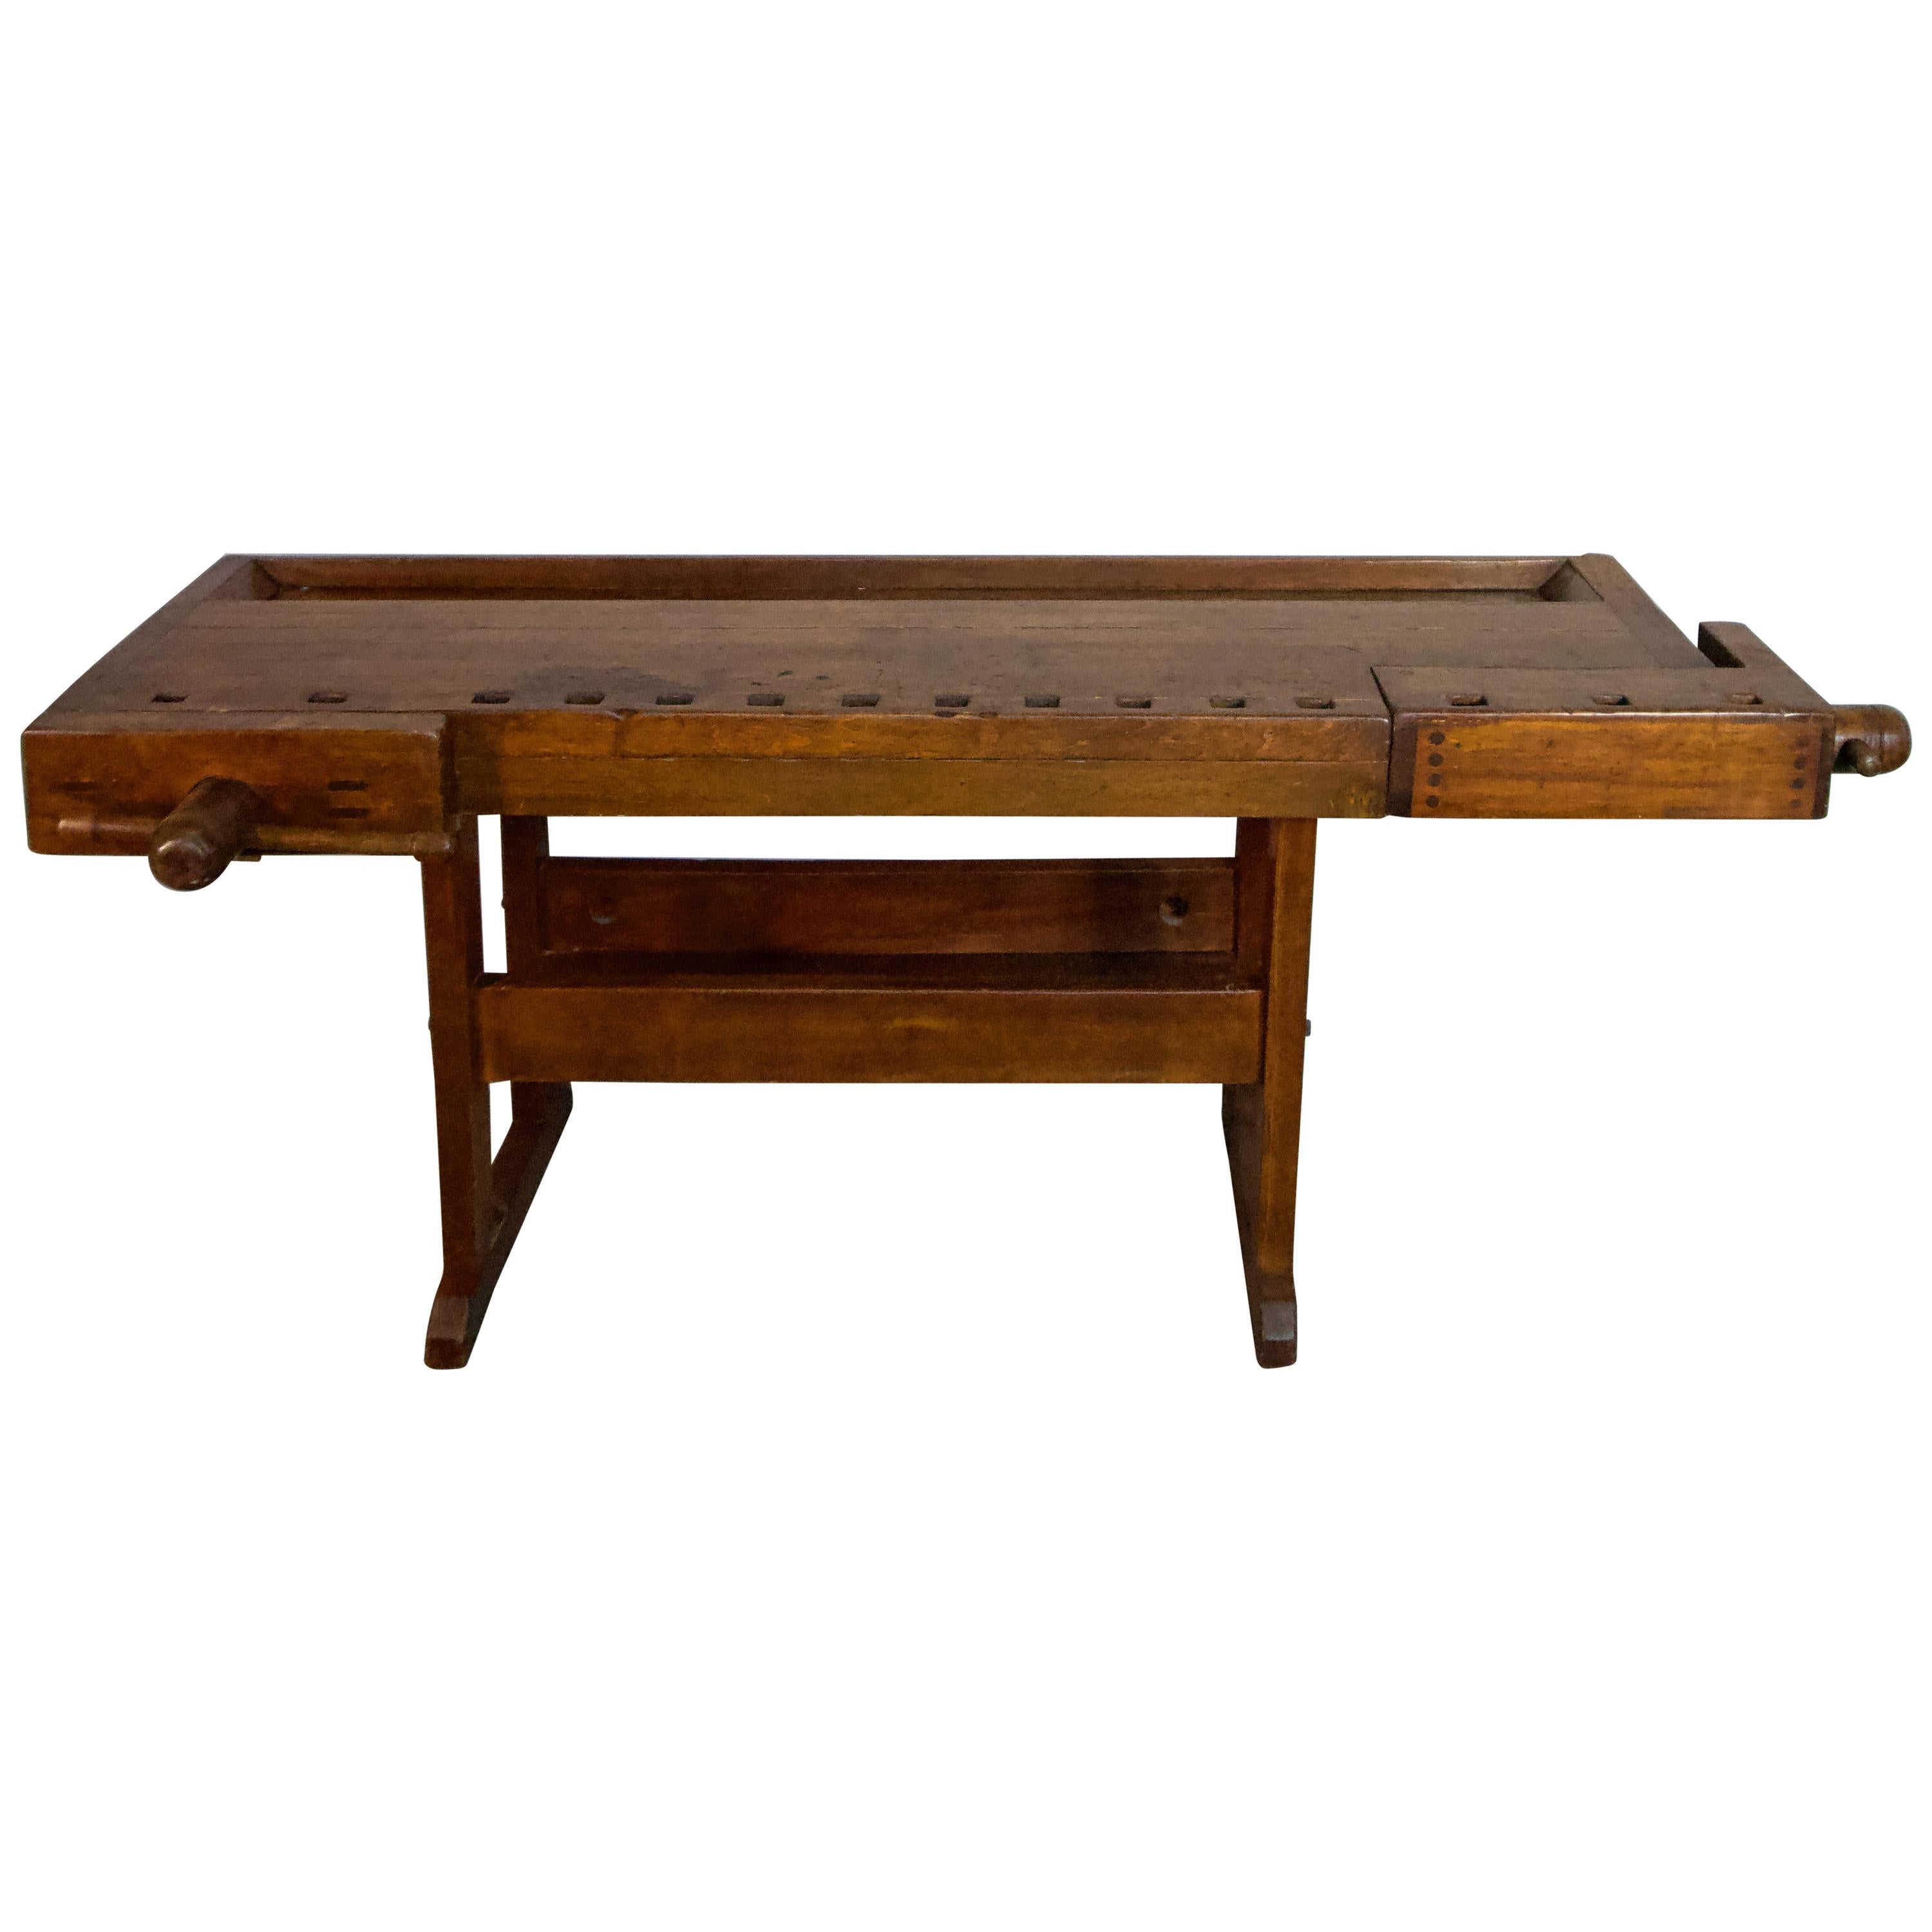 Cabinet Makers Work Bench, as Sideboard, Serving Table or Bar